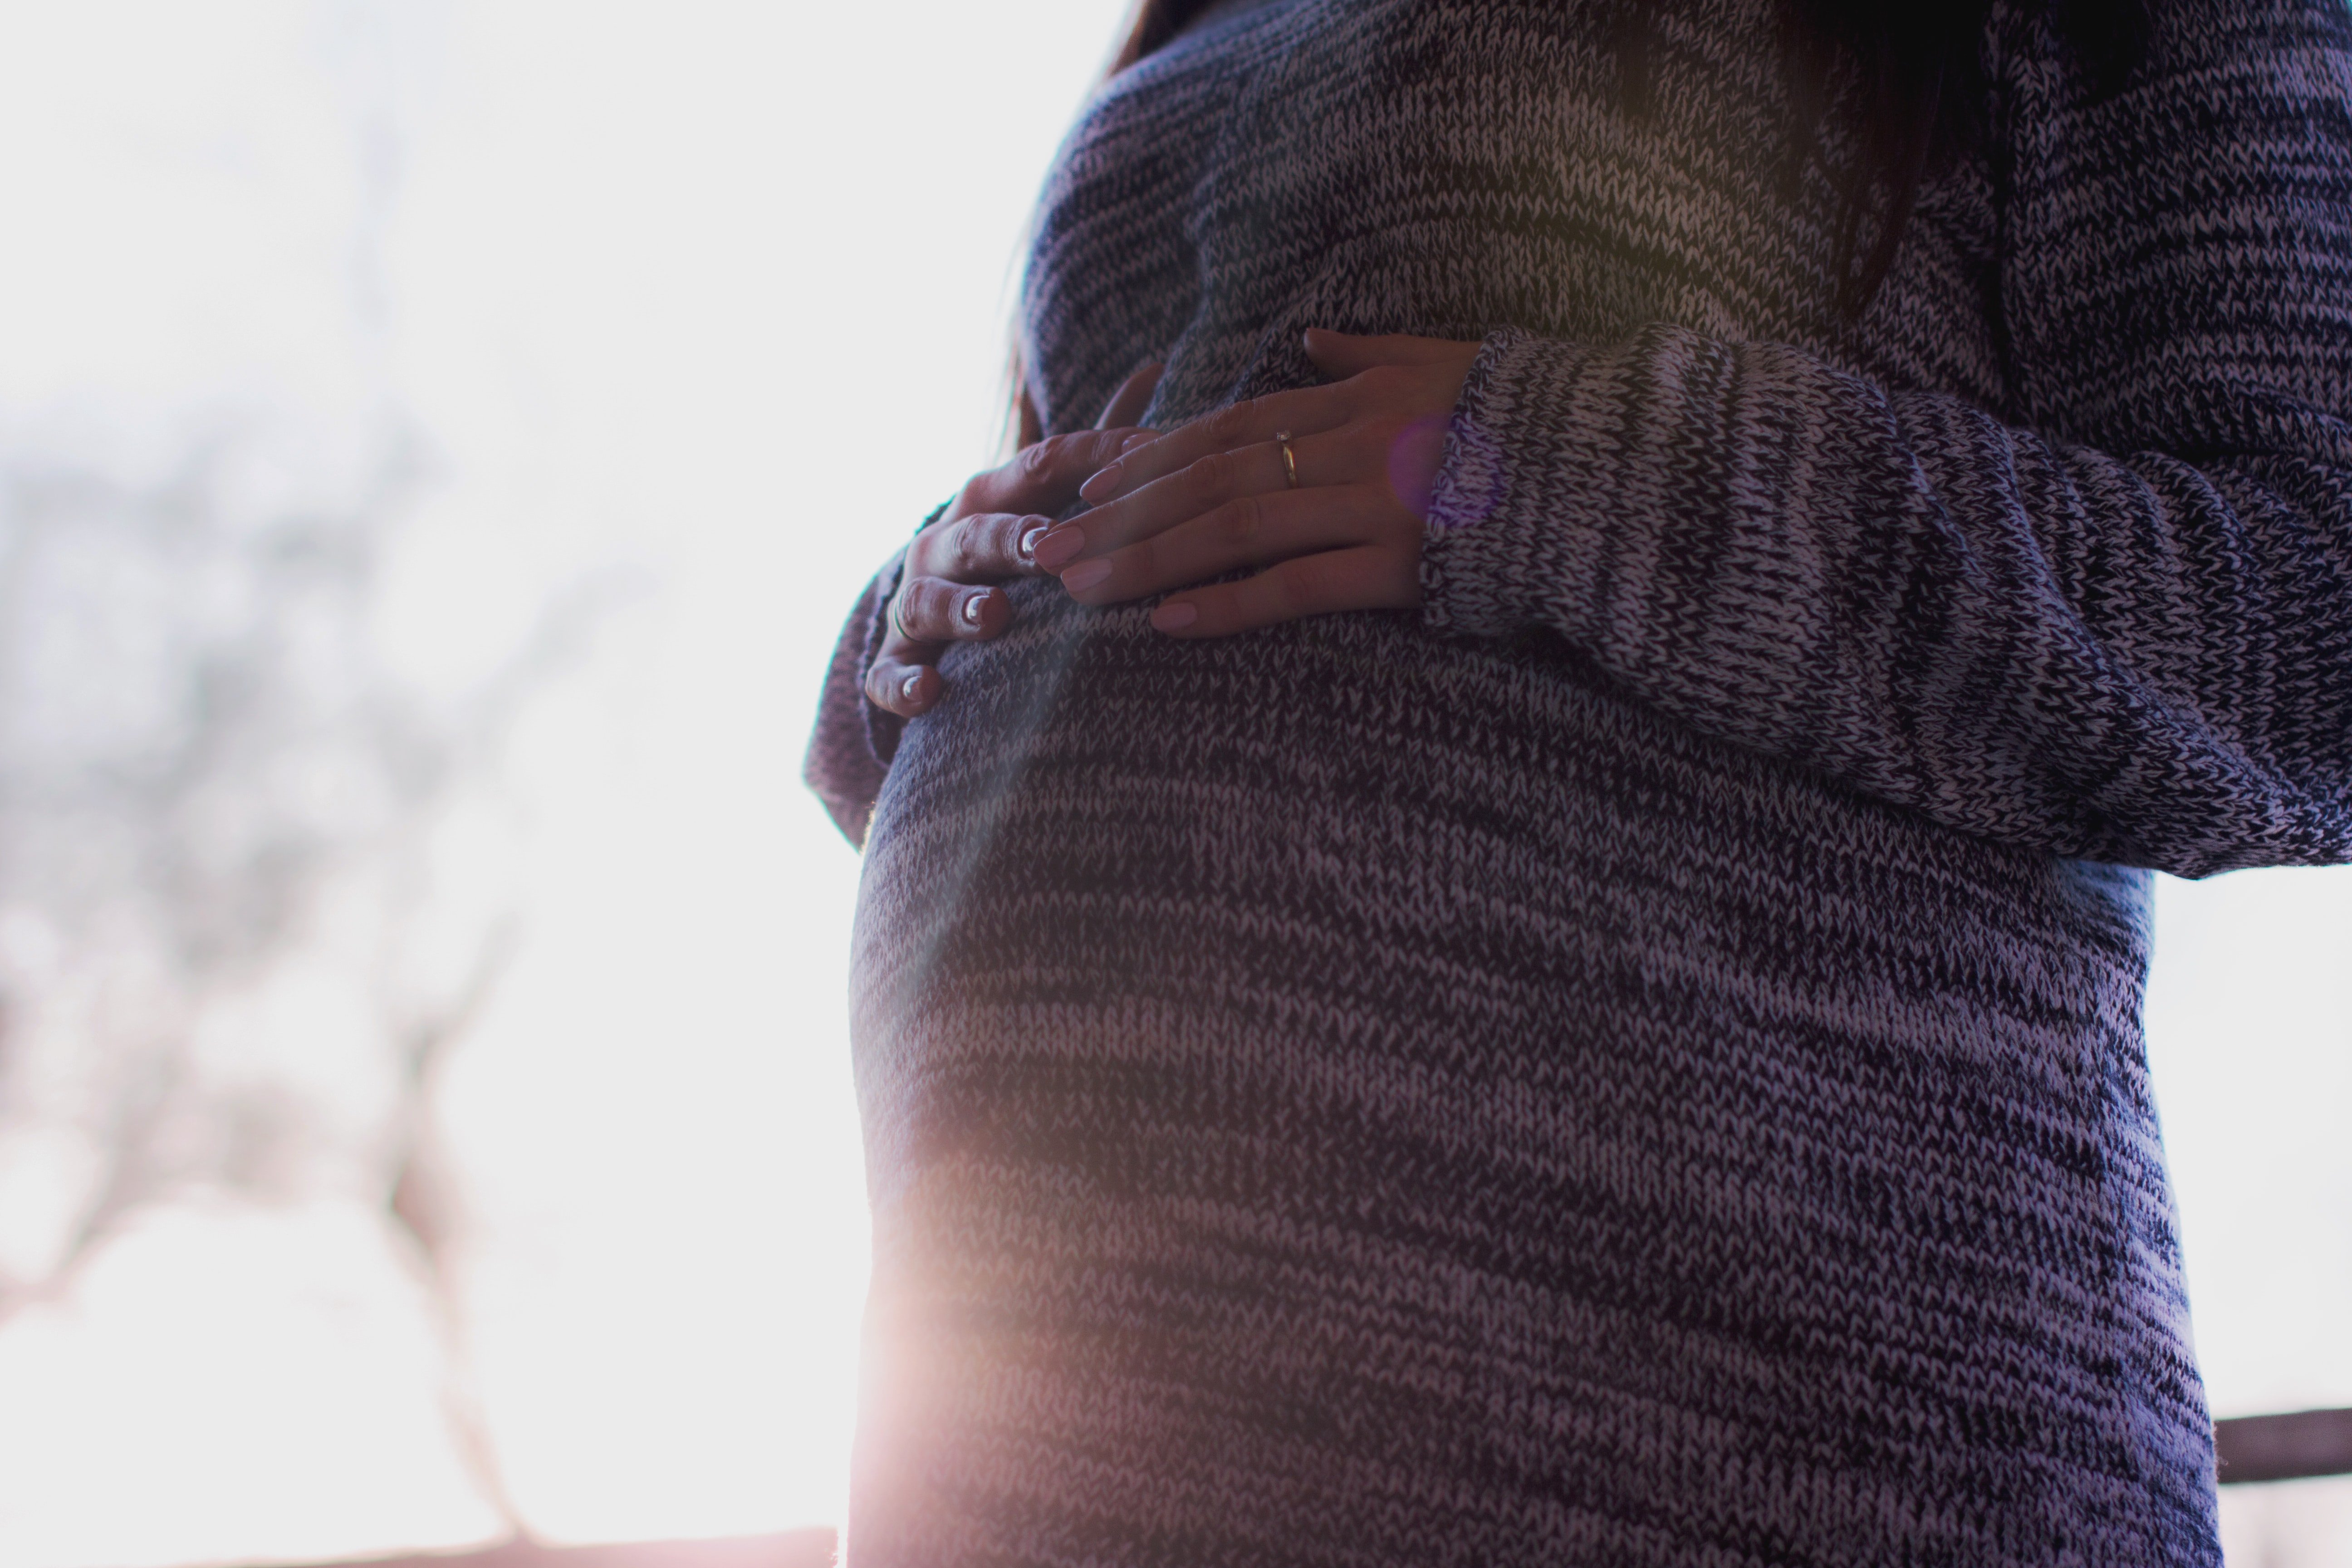 Linda got pregnant again but she hesitated before announcing the news to Todd | Source: Pexels